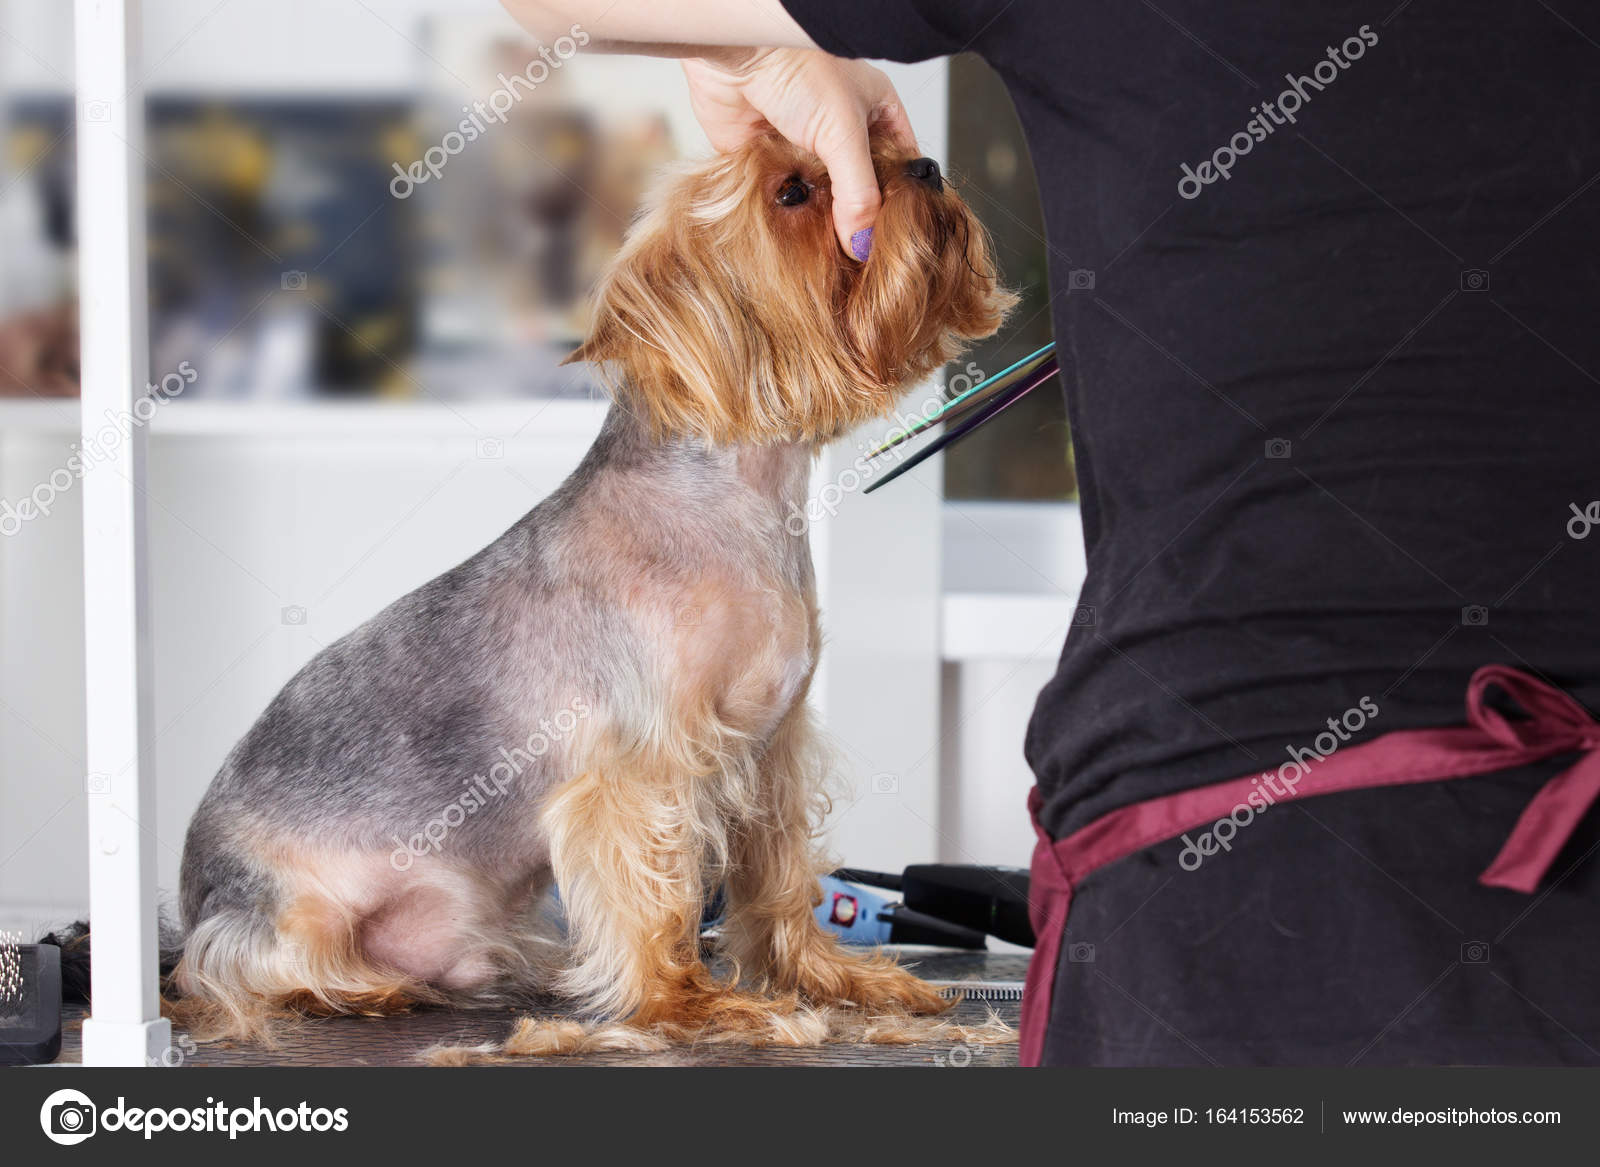 Images Yorkie Dog Hairstyles Yorkshire Terrier Dog On A